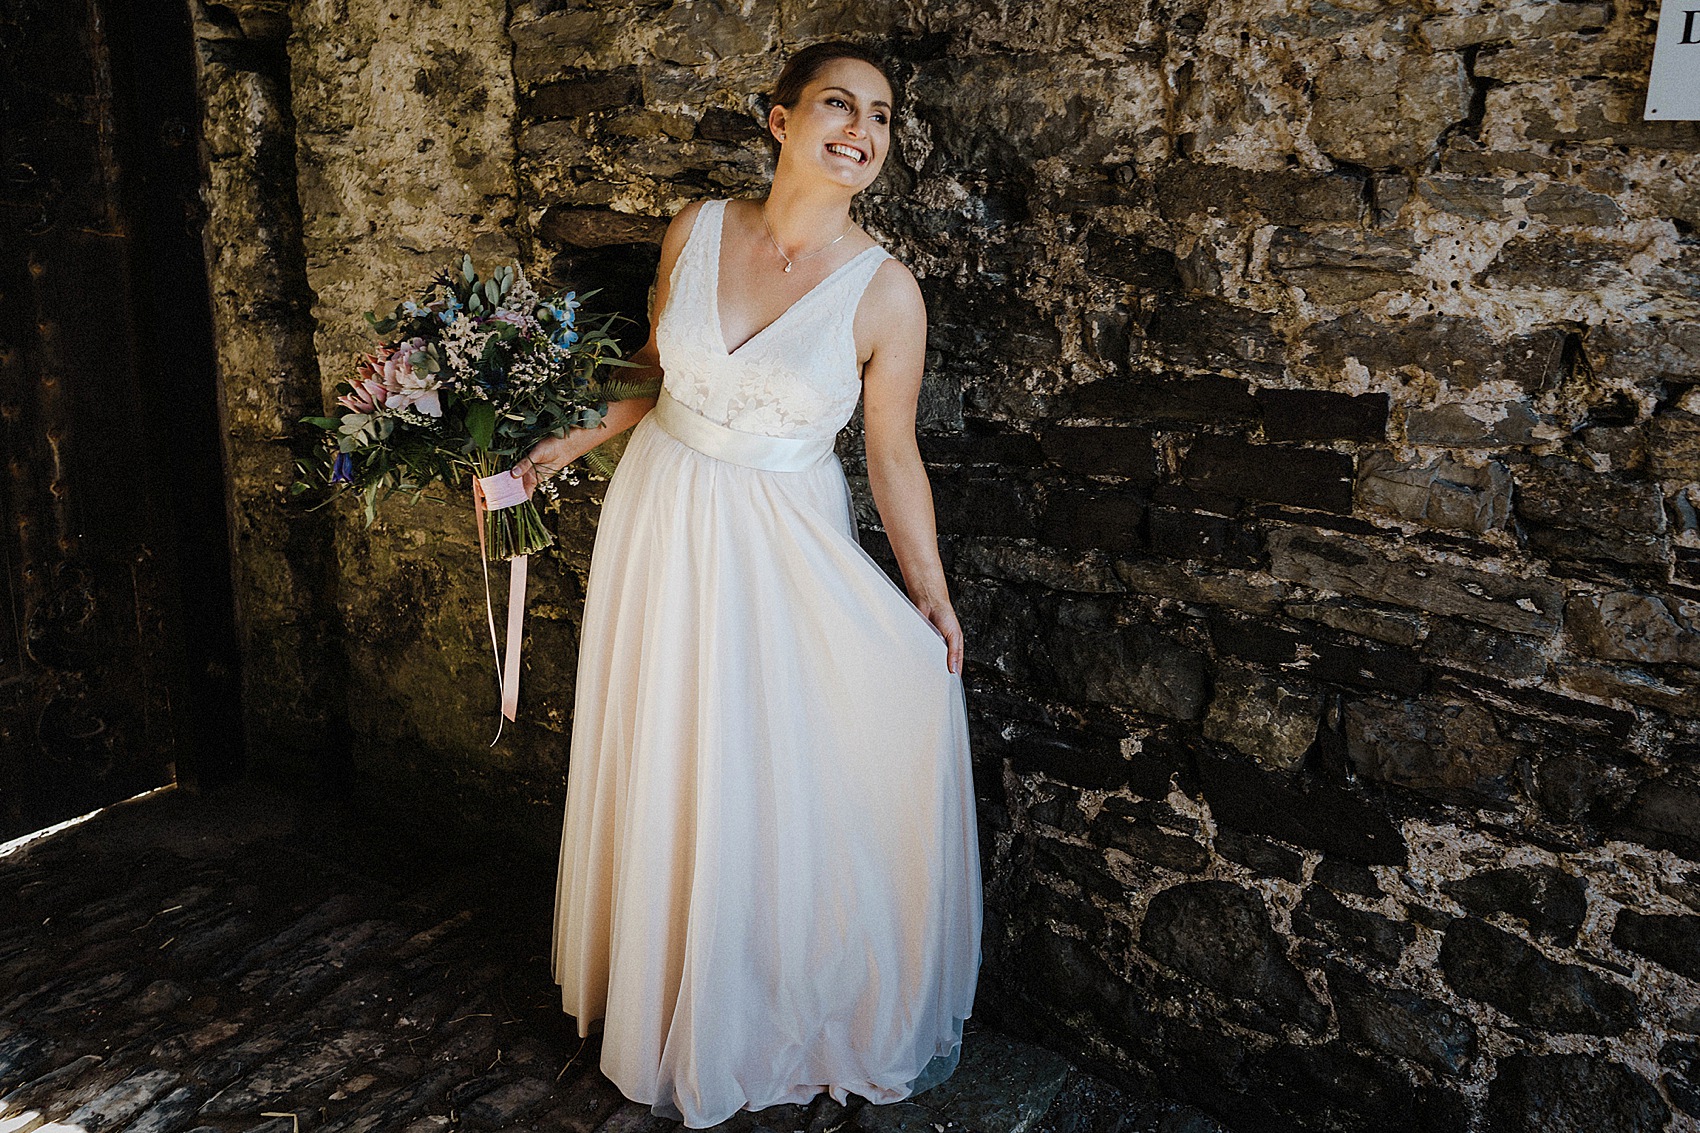 Blush pink Catherine Deane wedding dress  - A Blush Pink Catherine Deane Dress for a Welsh Castle Wedding With 700 Japanese Origami Paper Cranes